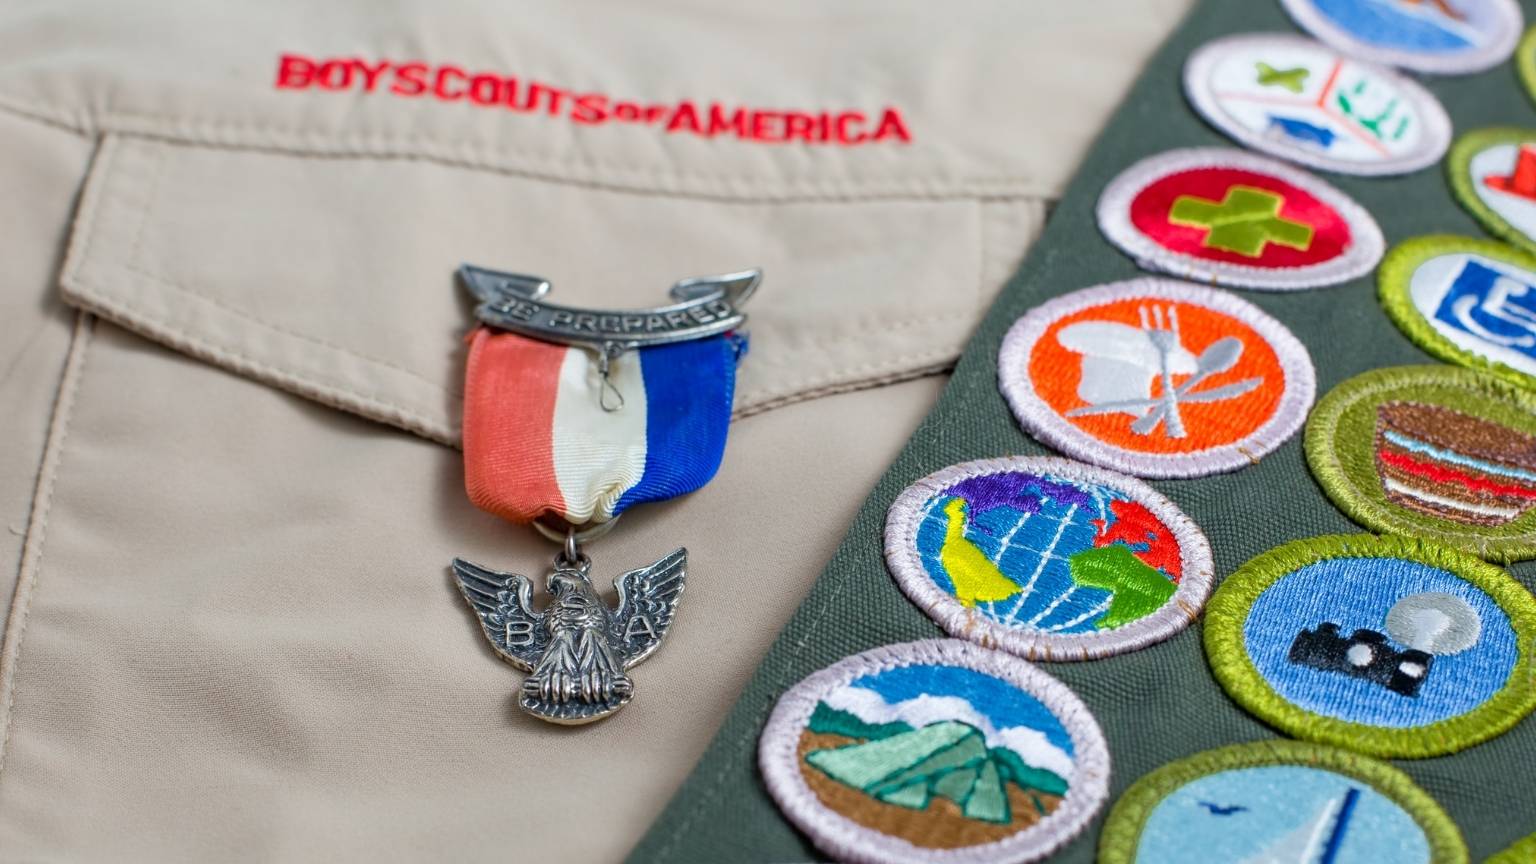 Eagle Scout pin displayed on a Boy Scout uniform